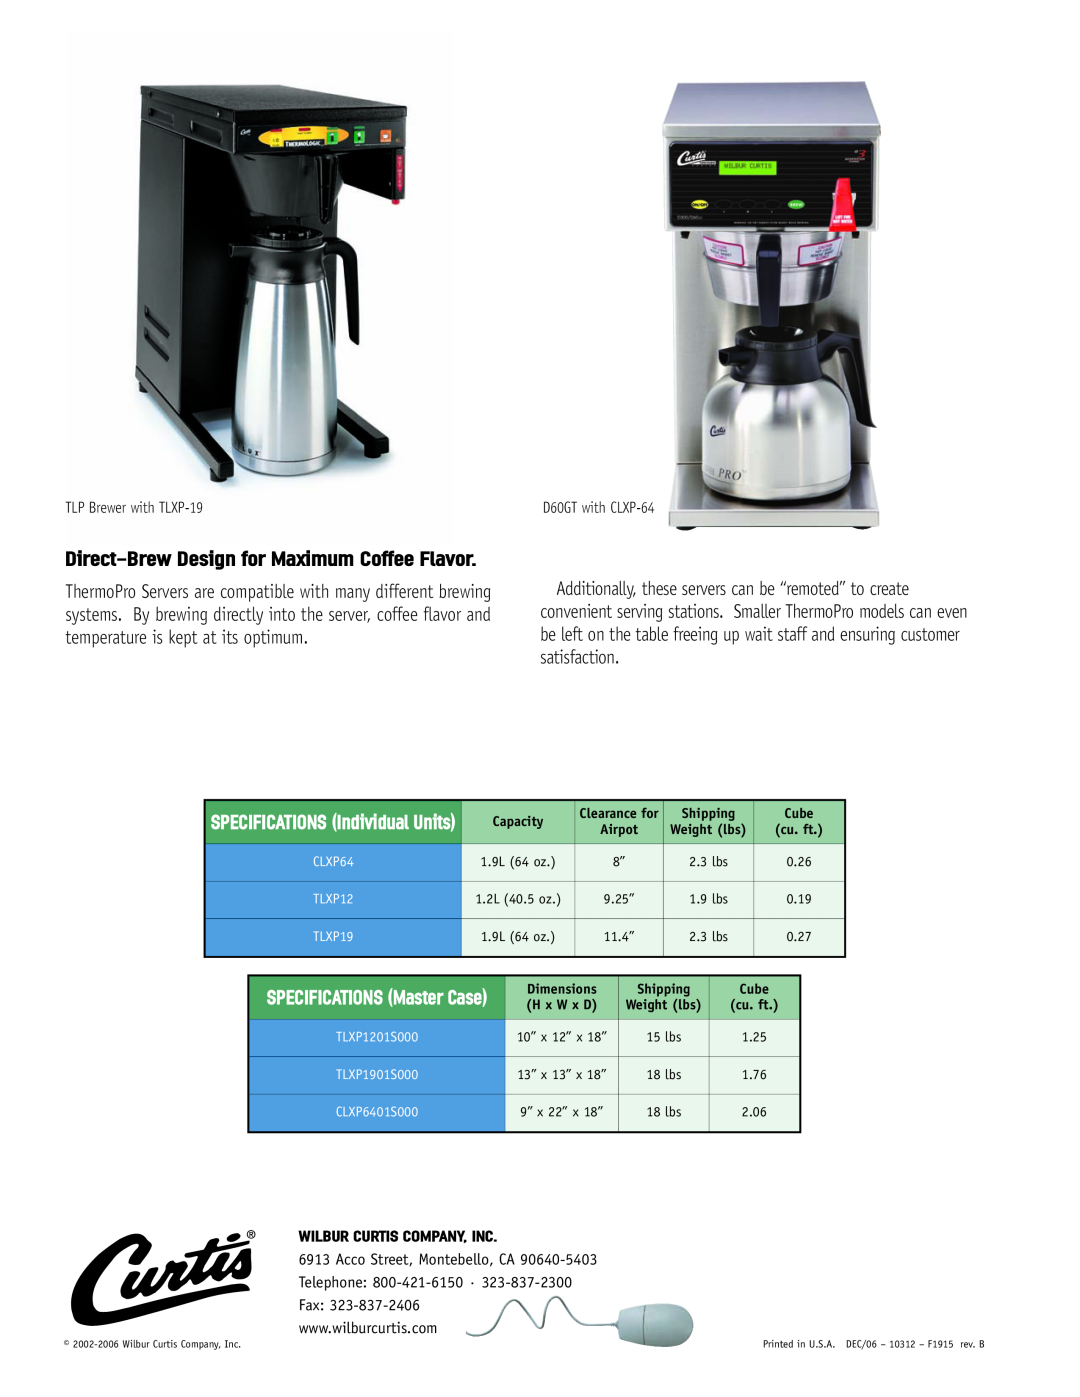 Curtis TLXP12, CLXP64 manual Direct-BrewDesign for Maximum Coffee Flavor, SPECIFICATIONS Master Case 